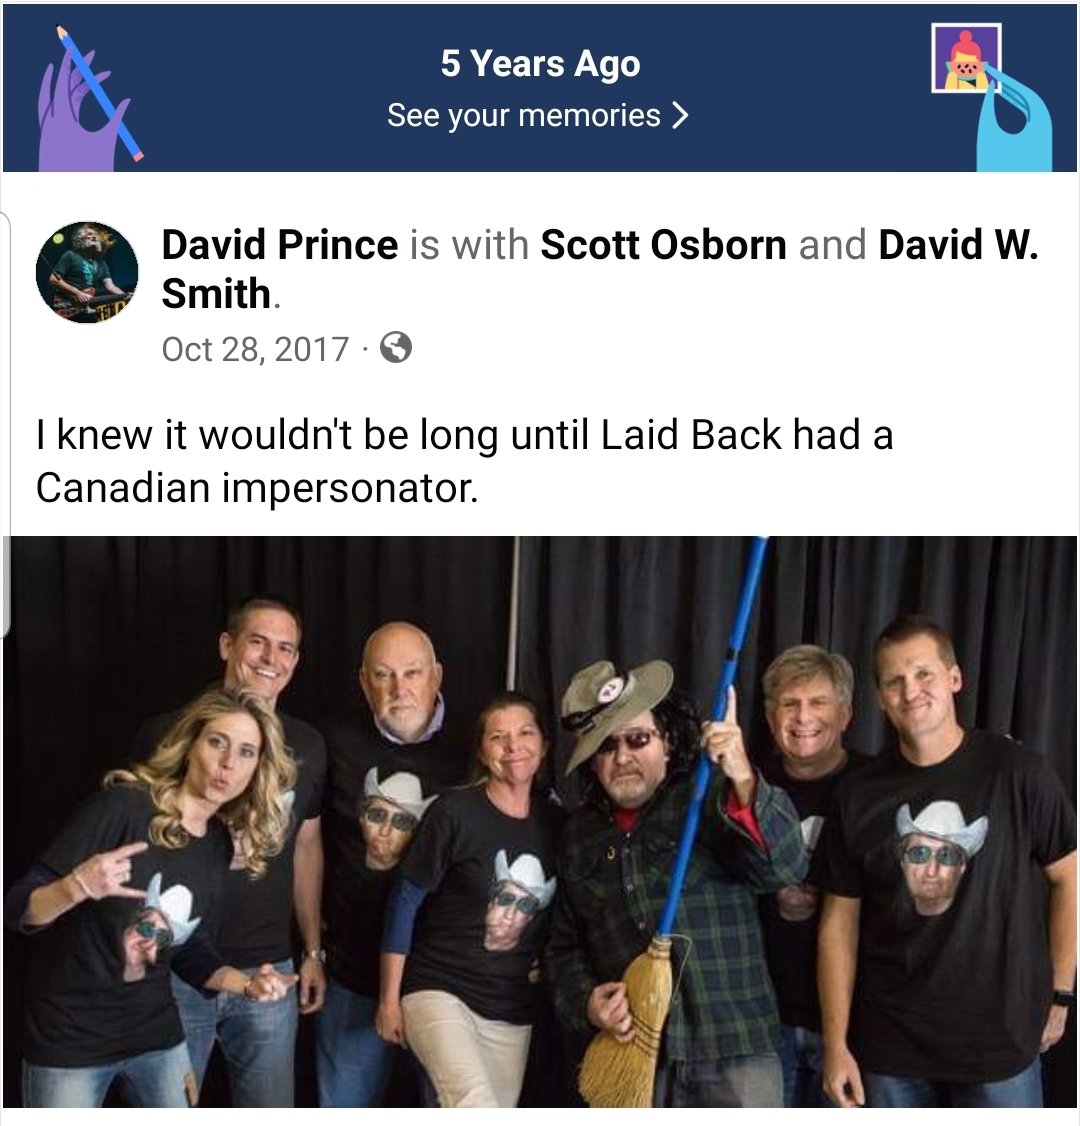 Five years, @TheRealLBCP. Time flies and so forth!

#LaidBackTeachers 
#MountainWorkshops
#CanadianImpersonator